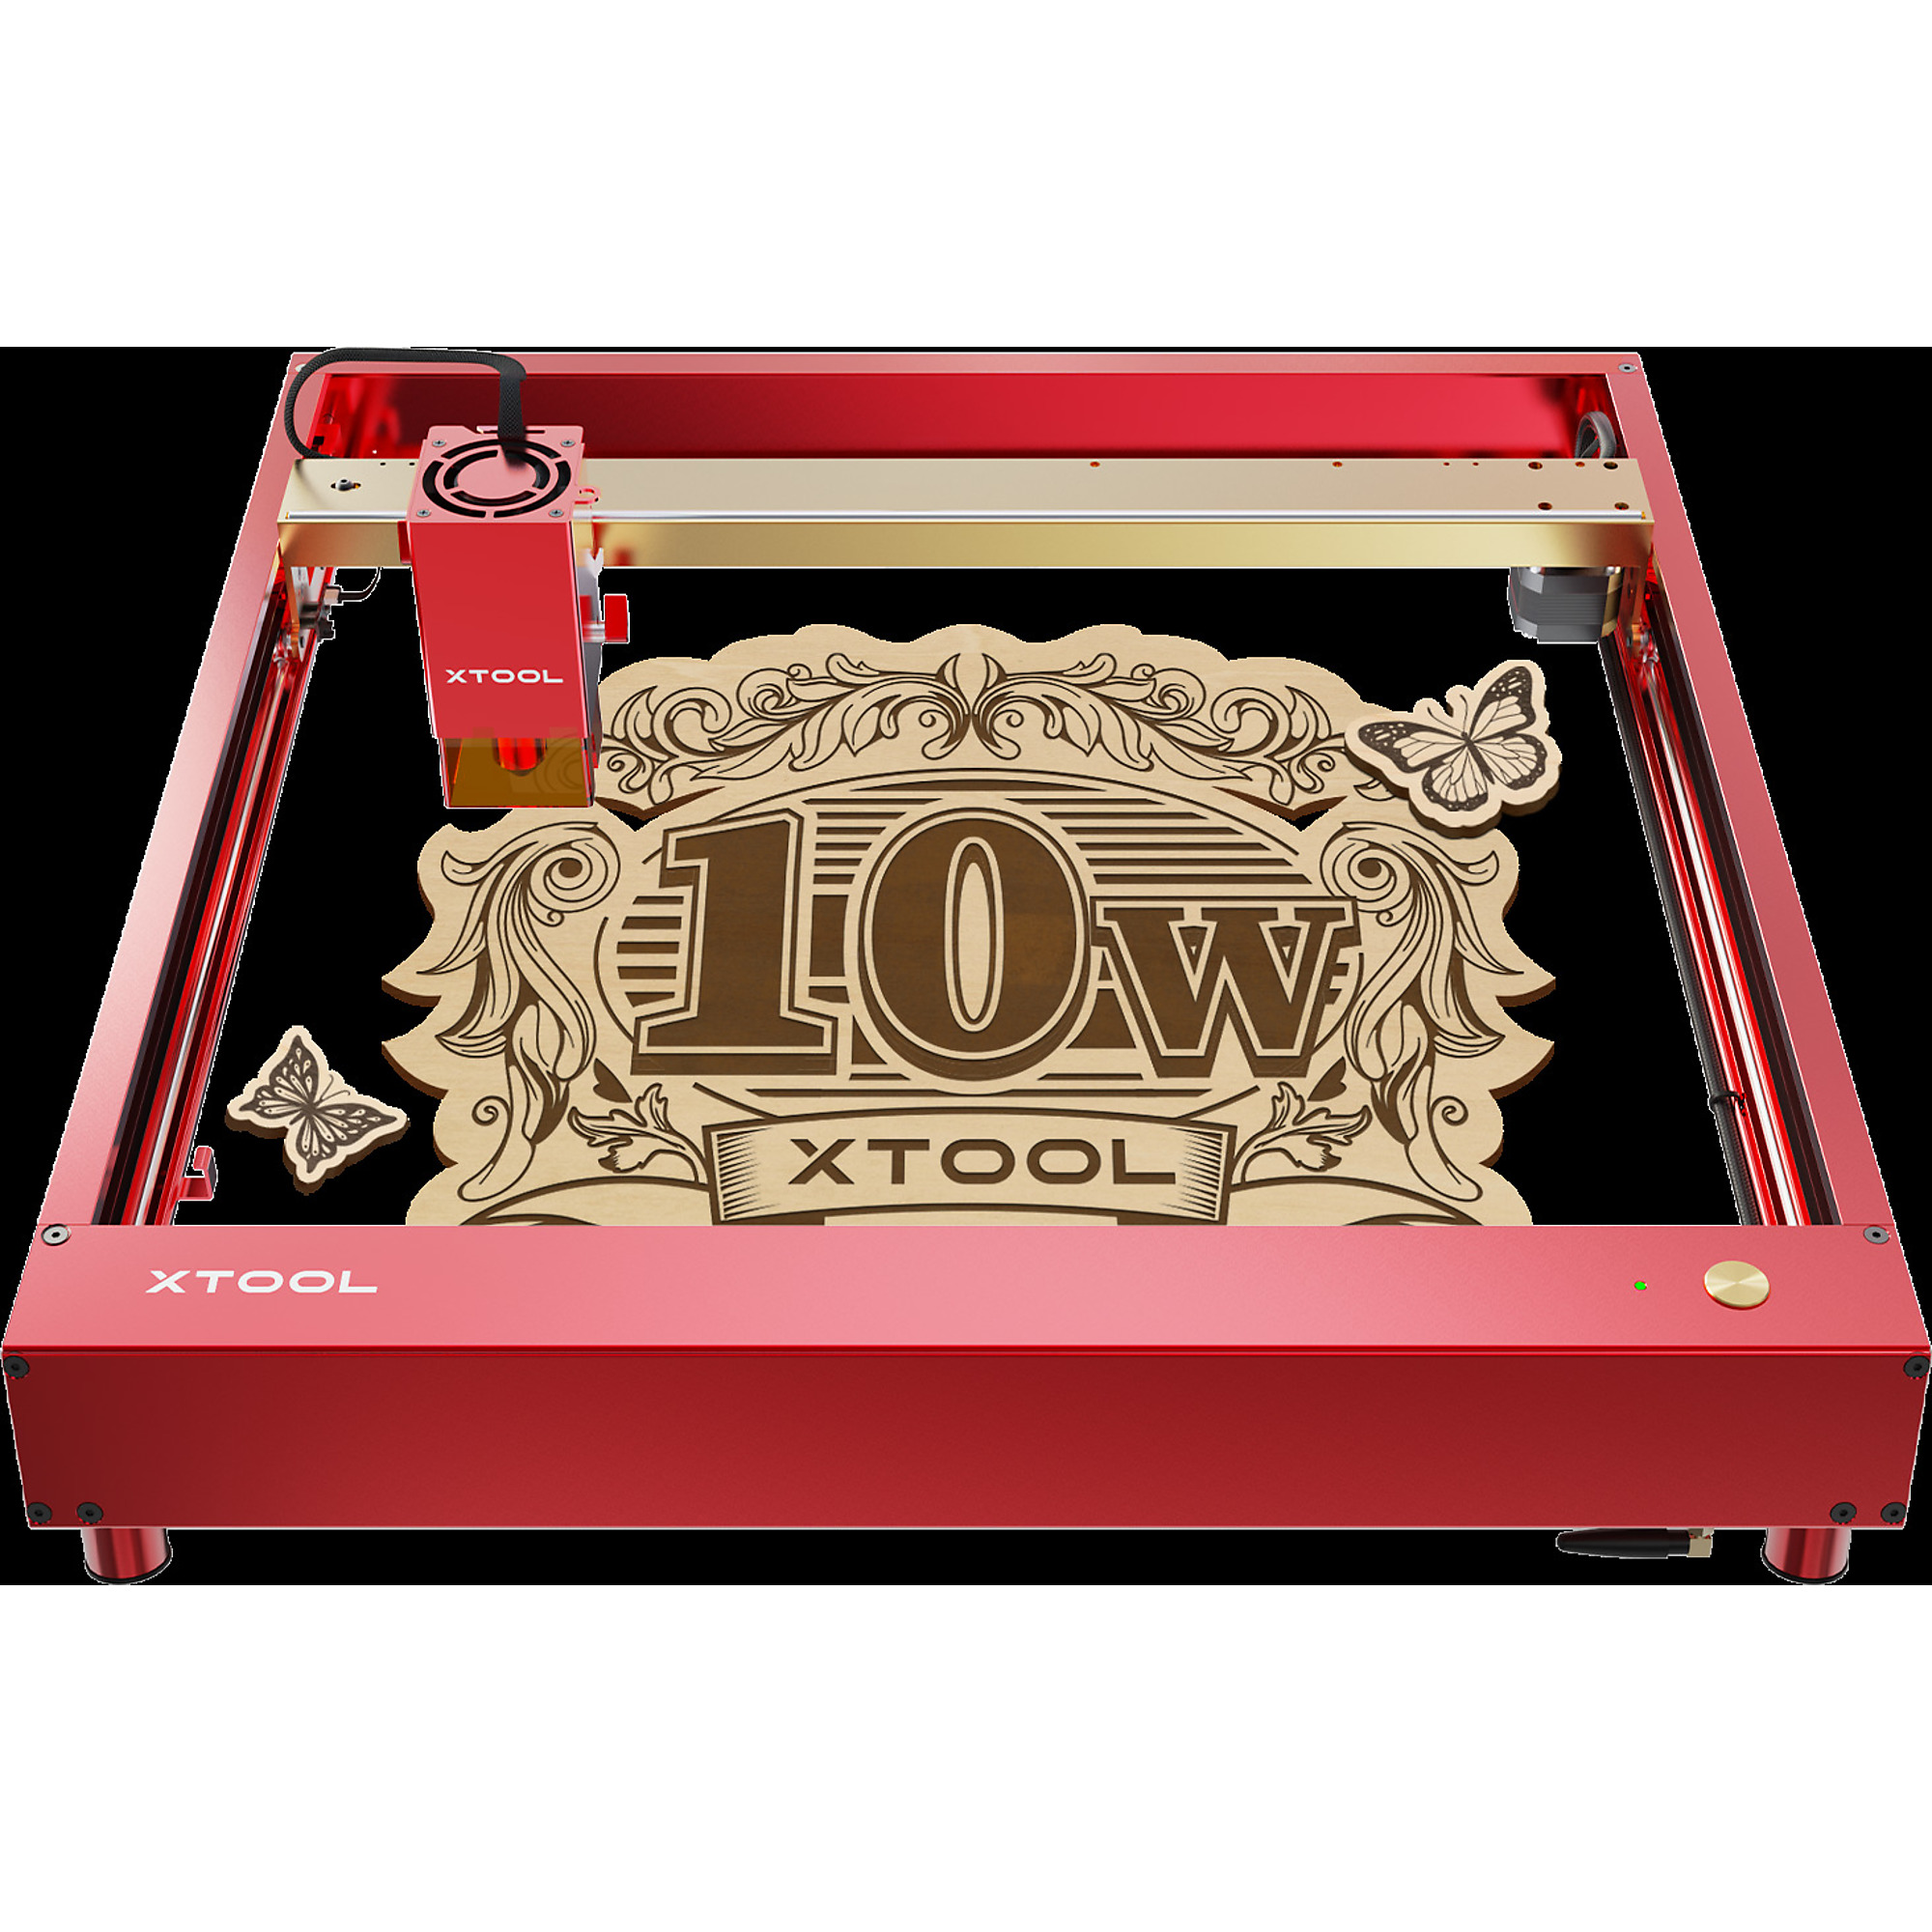 xTool, Laser Cutter and Engraver, 10w, 400mm/s, Model, Working Width 14.57 in, Working Length 31.89 in, Laser Power 10 W, Model P1030298